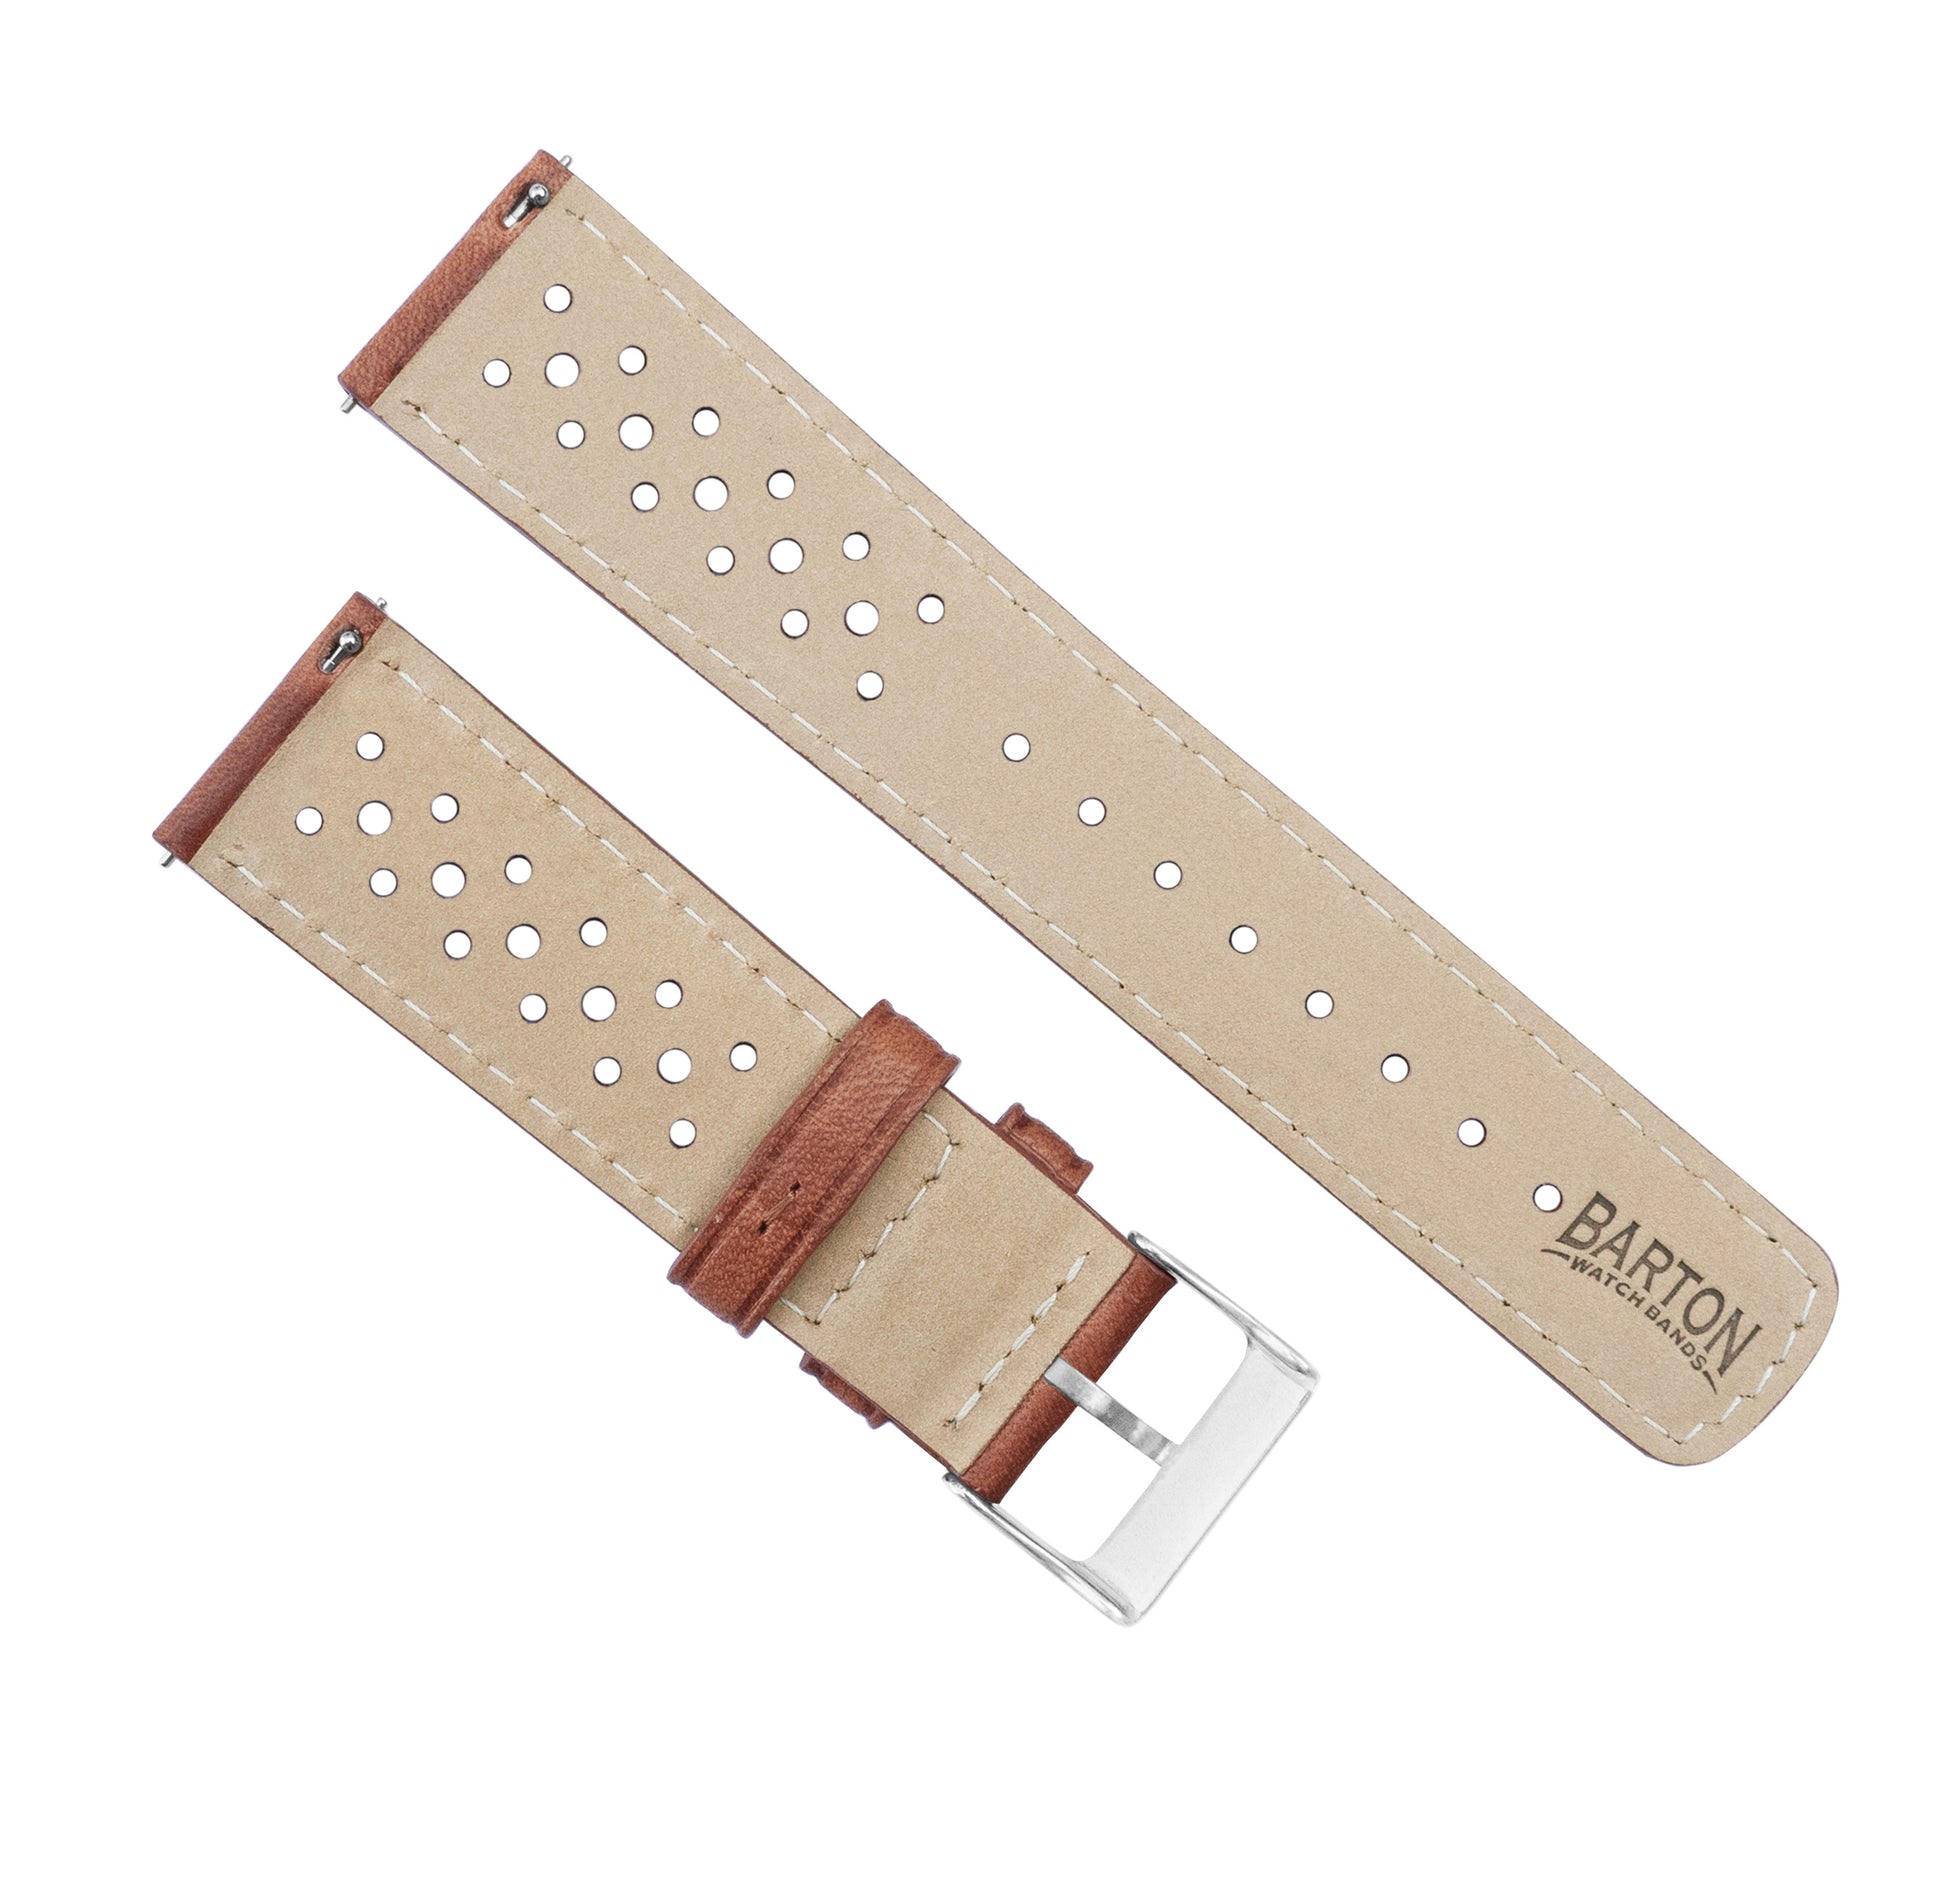 Fossil Sport | Racing Horween Leather | Caramel Brown - Barton Watch Bands